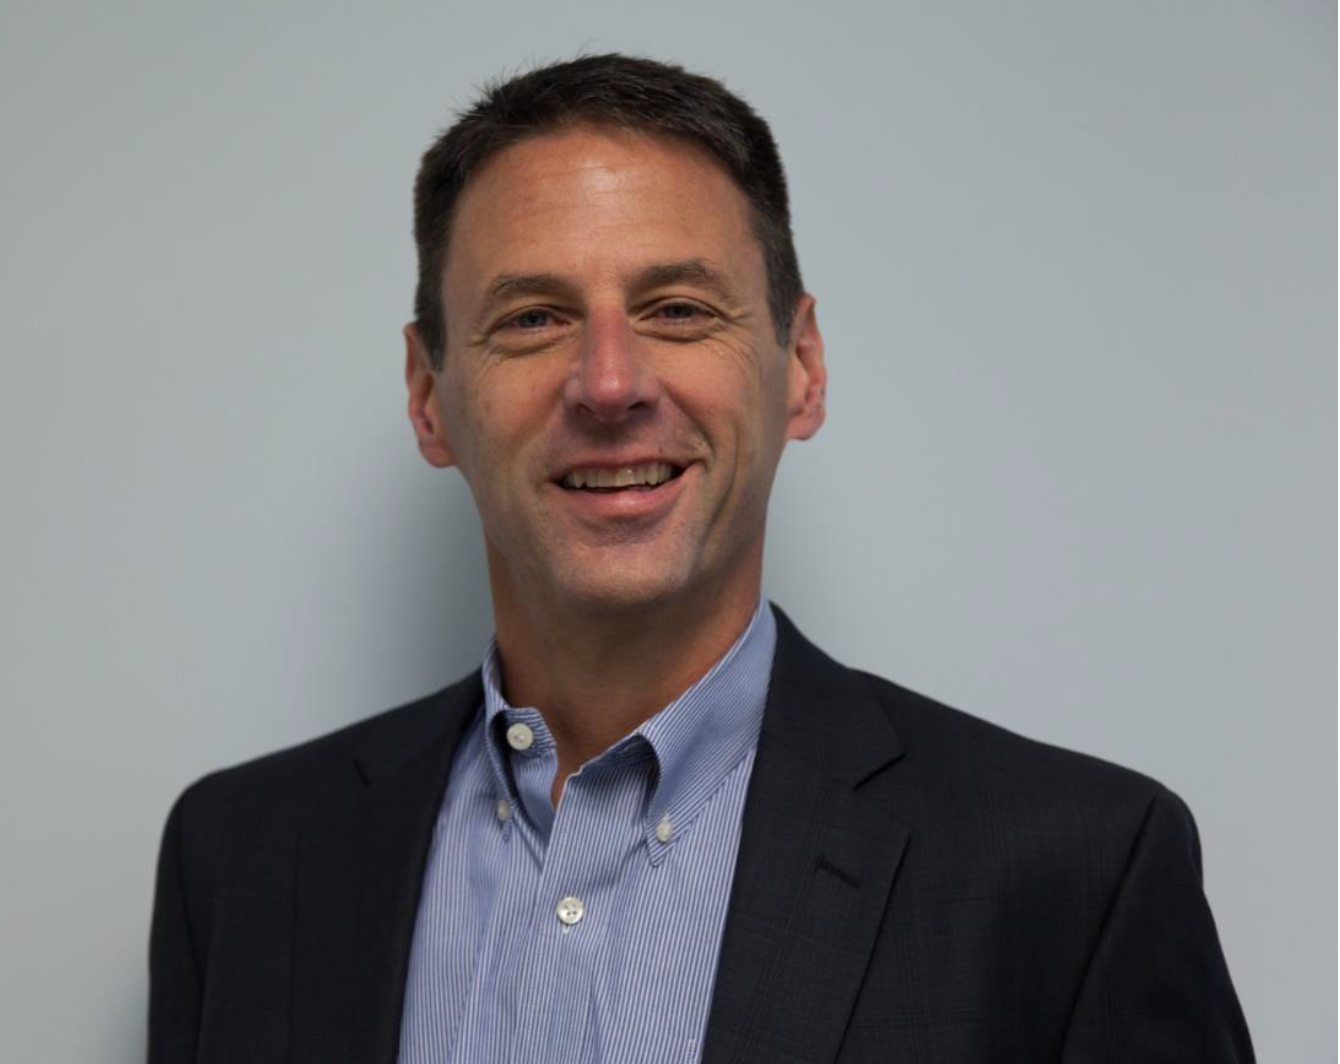 EREMA NA is Pleased to Welcome Gregory Wool to our team as VP of Sales